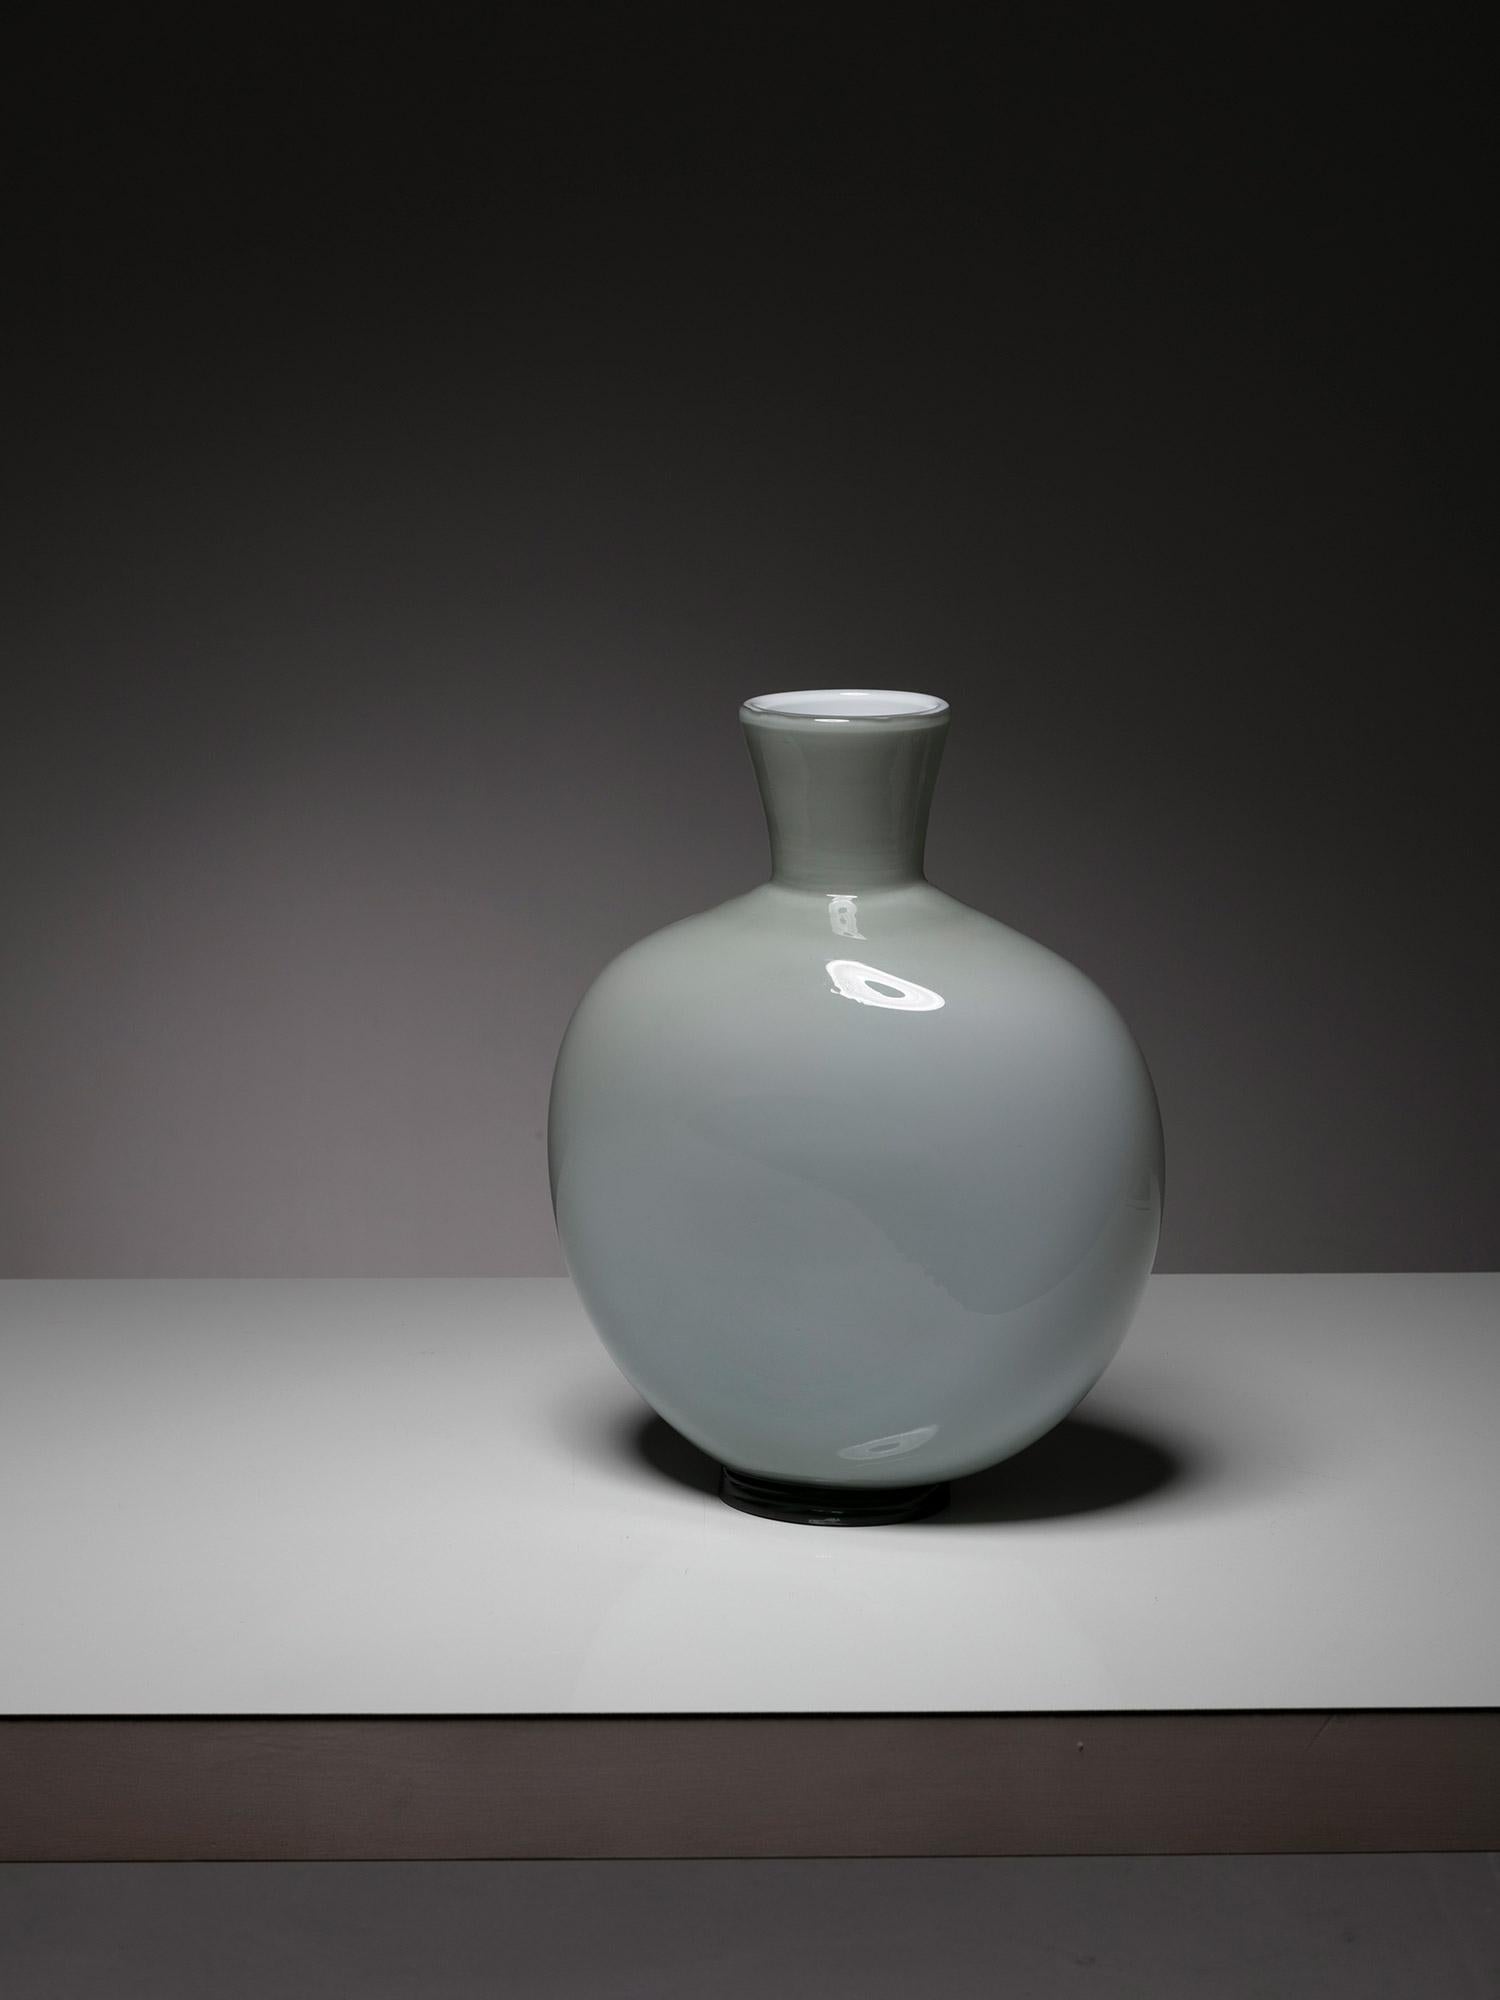 Vase by Tomaso Buzzi for Venini.
Part of the Blue Catalog production, this piece was originally designed in 1933.